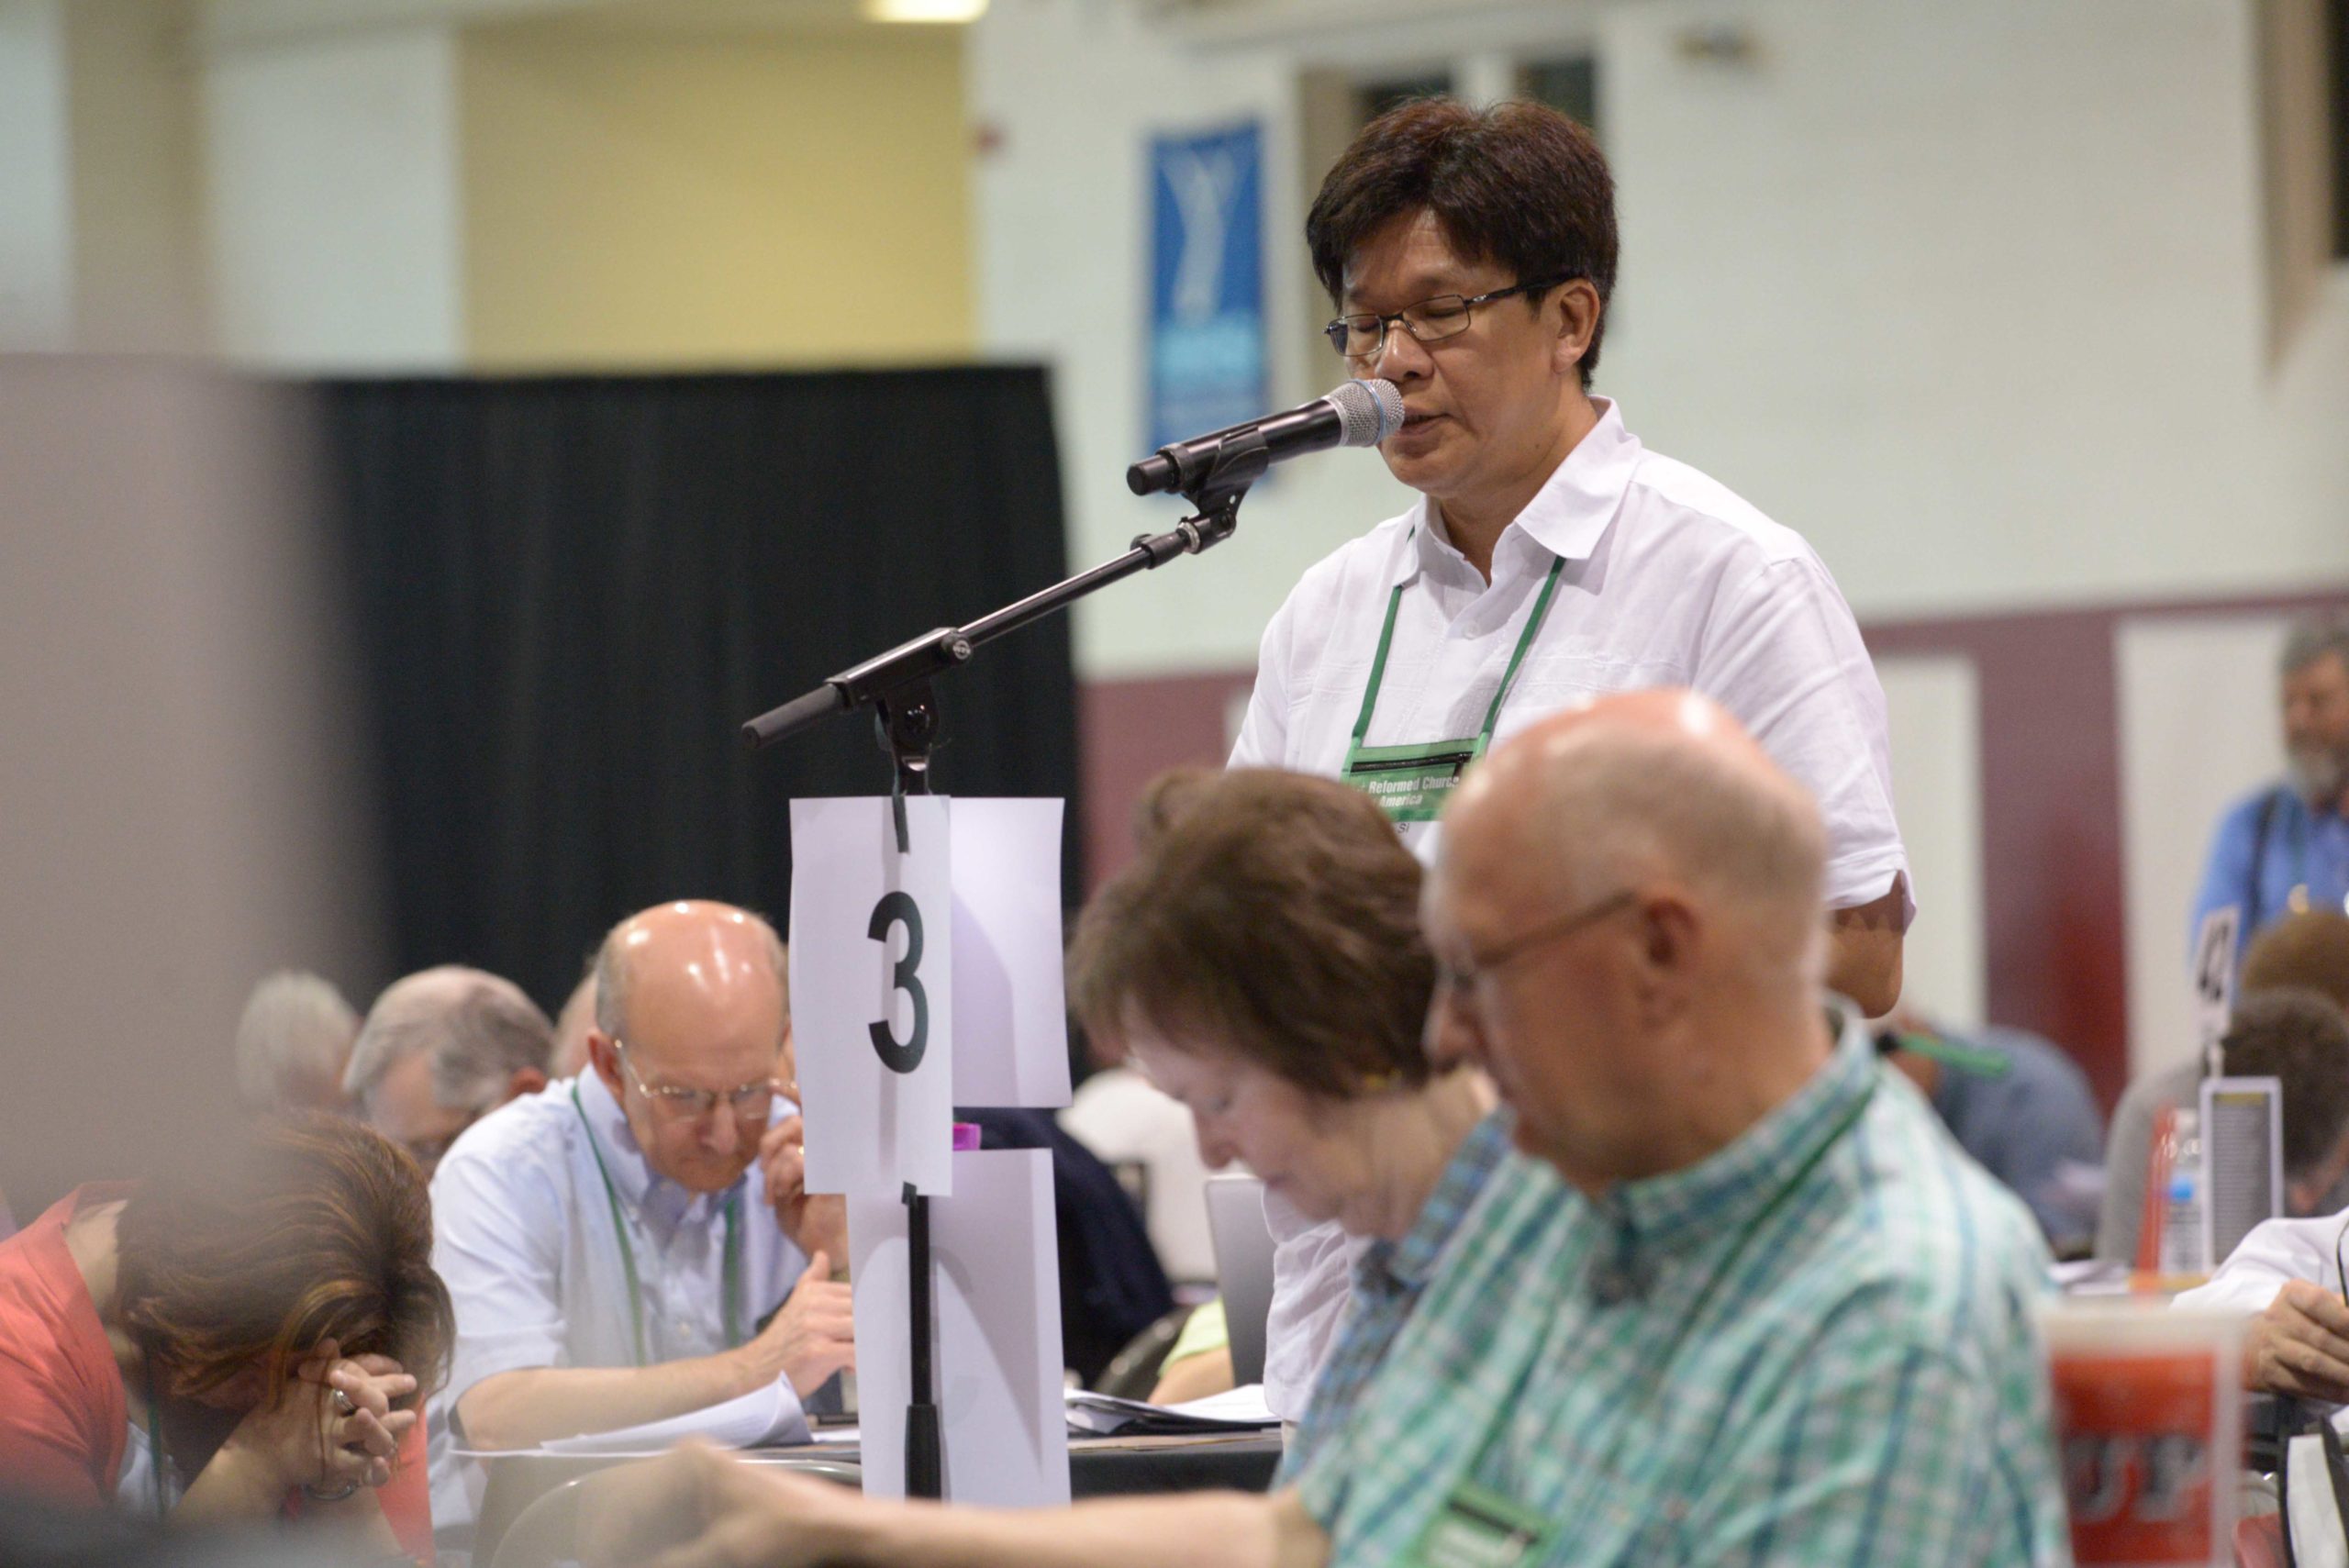 A delegate speaking at a mic during Genearl Synod 2014